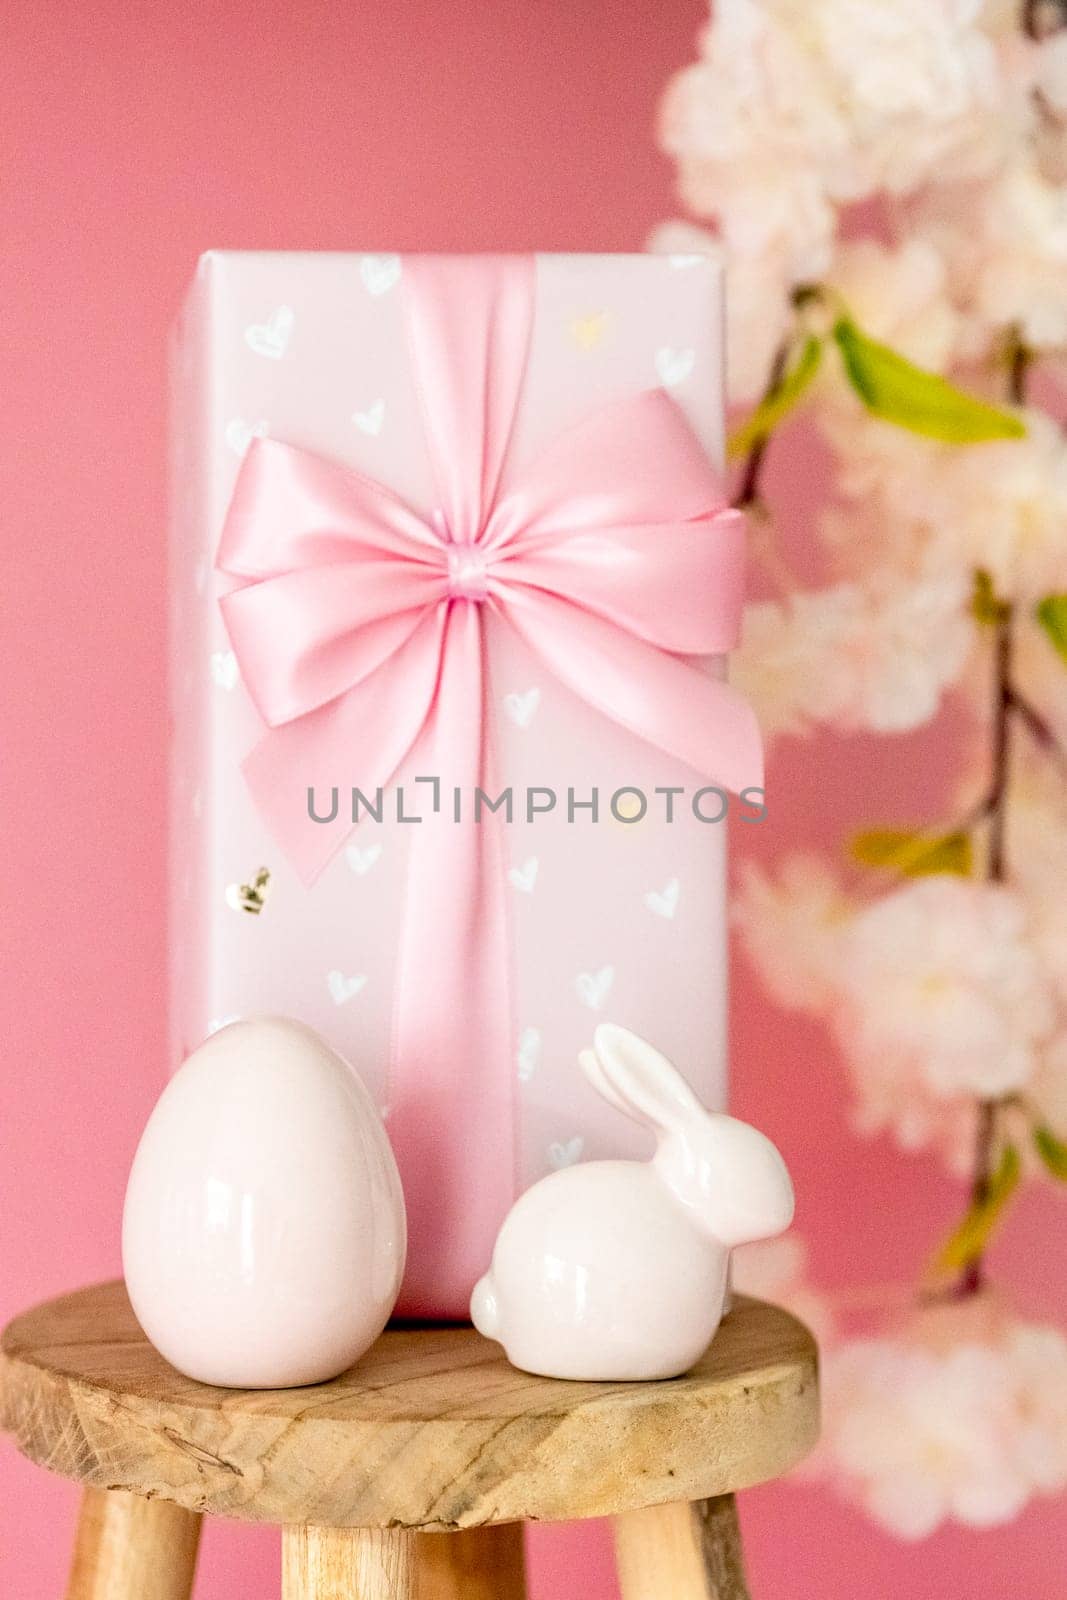 Porcelain Easter egg, bunny, large gift box with a bow stand on a small homemade decorative wooden stool on a pink background with a branch of apple tree blossom, side view close-up with selective focus.